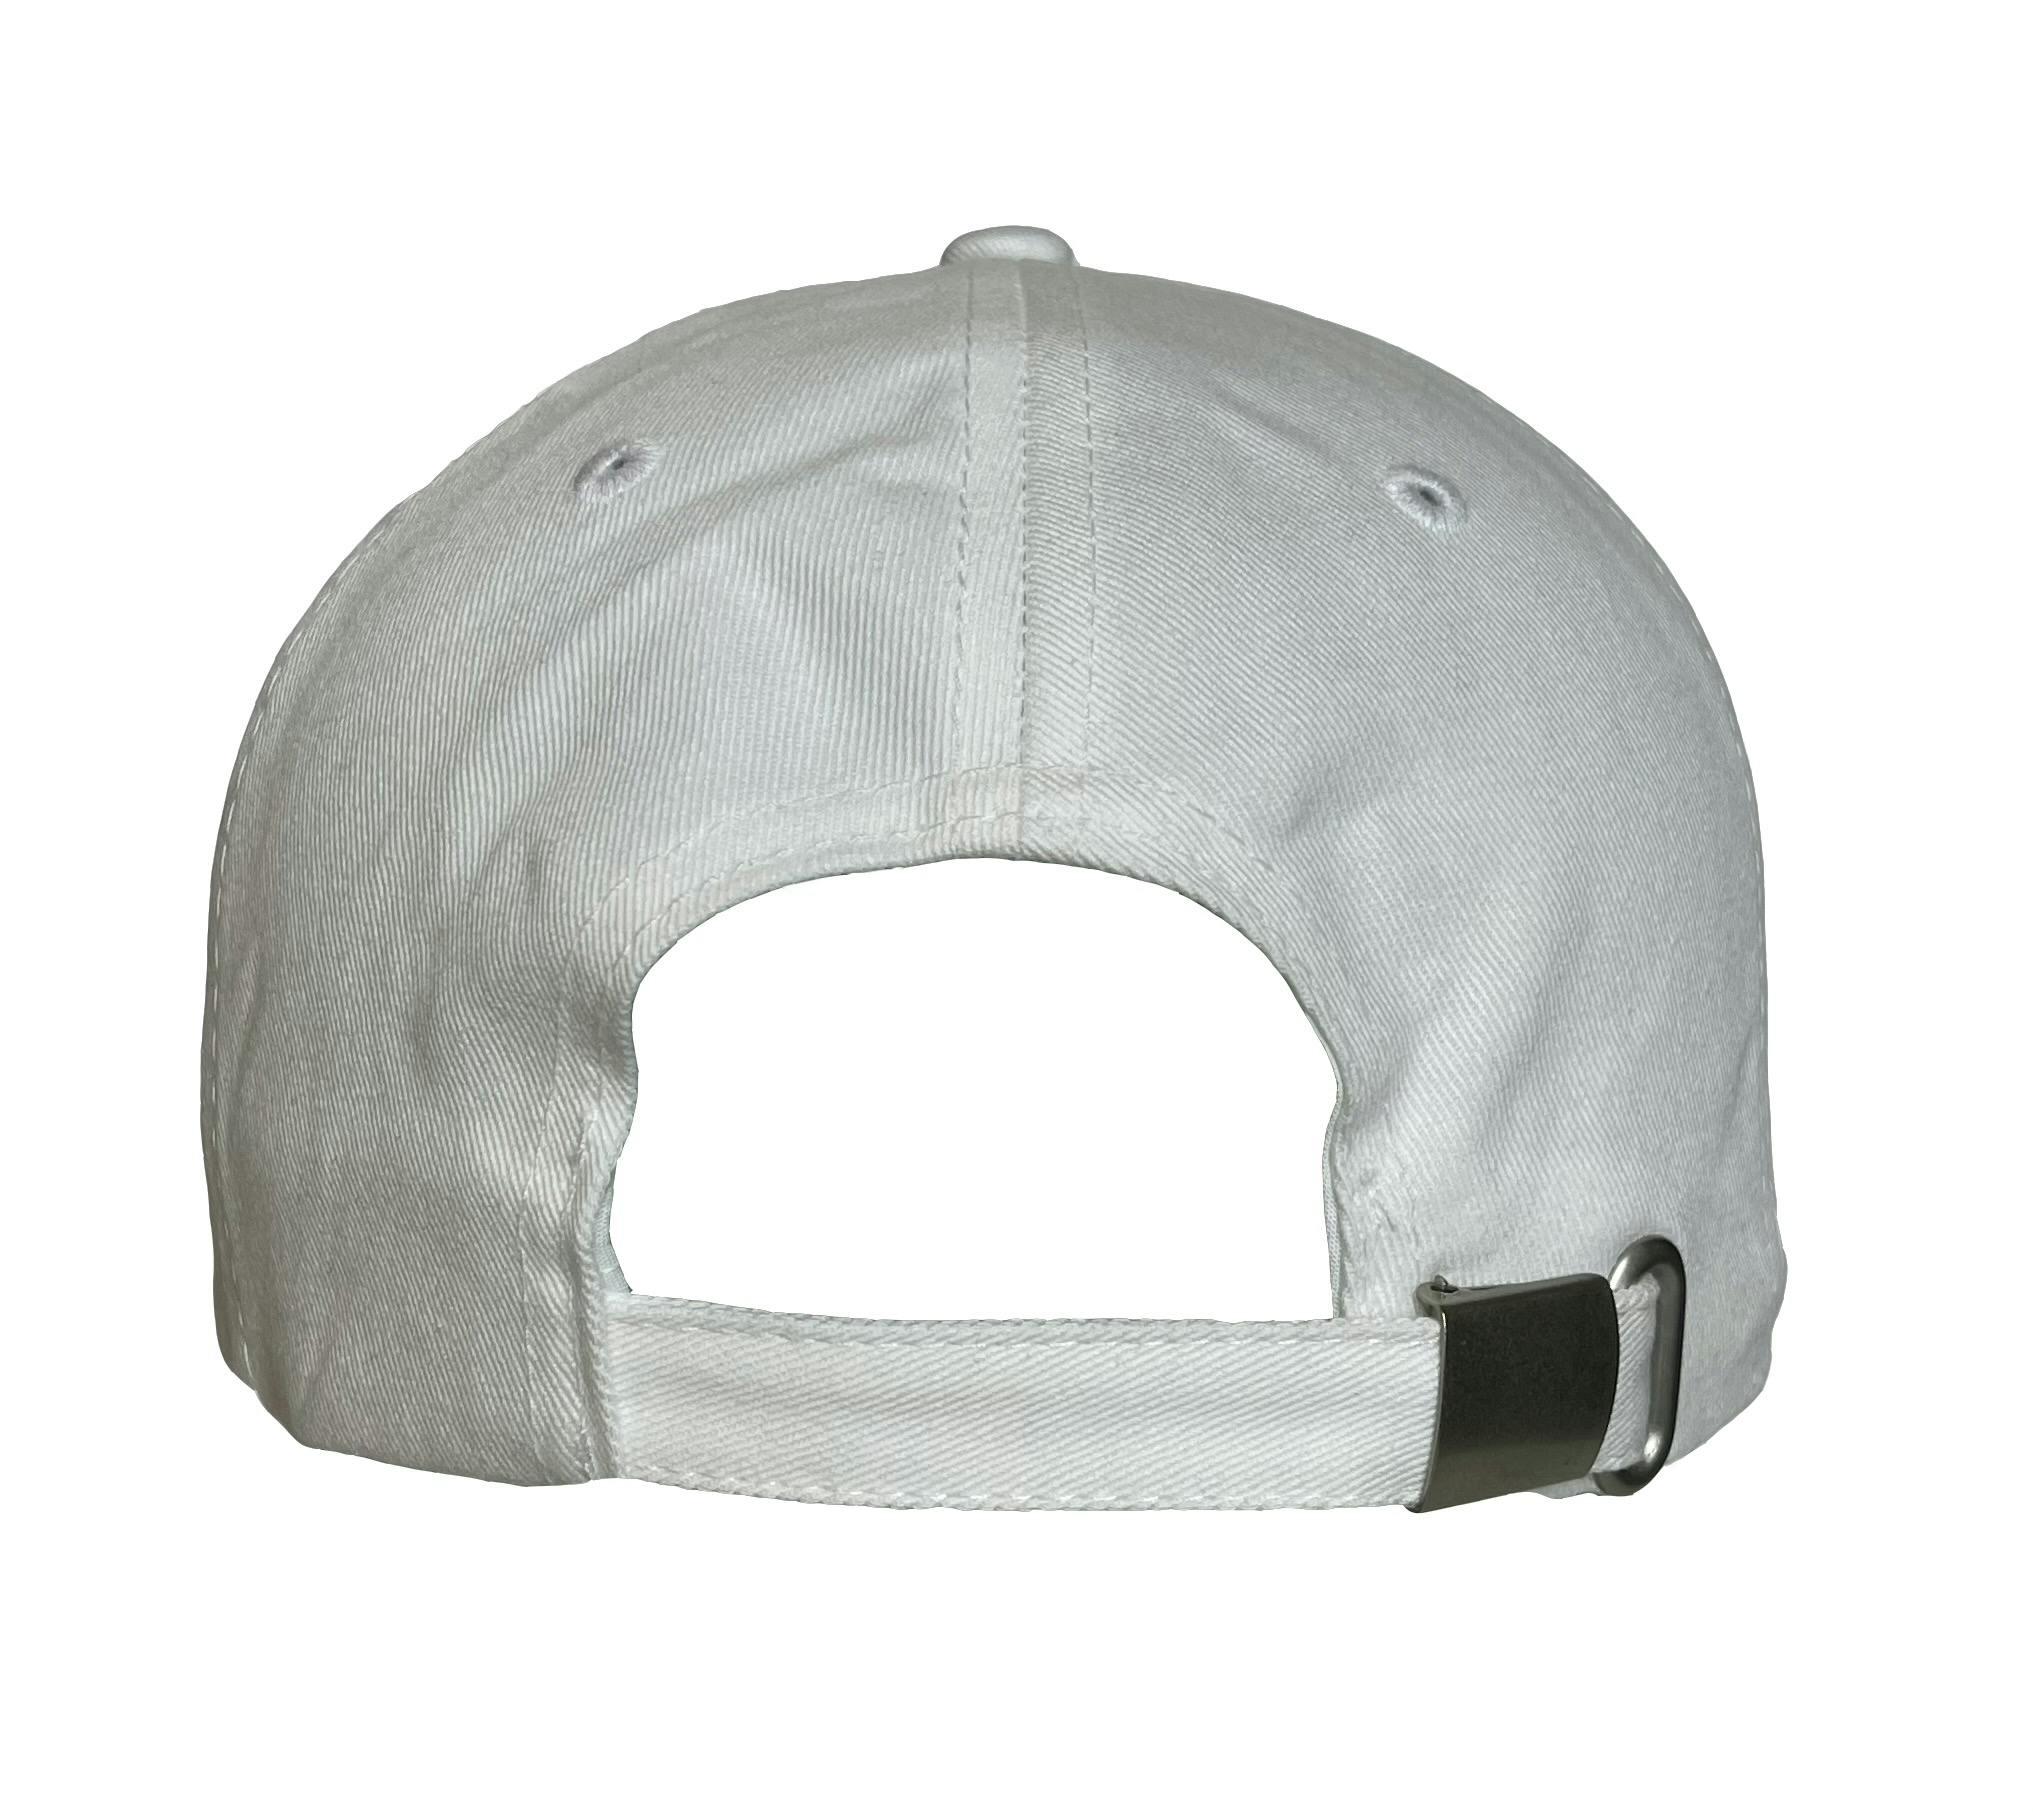 6 PANEL CHINO TWILL CAP WITH SILVER BUCKLE CLOSURE